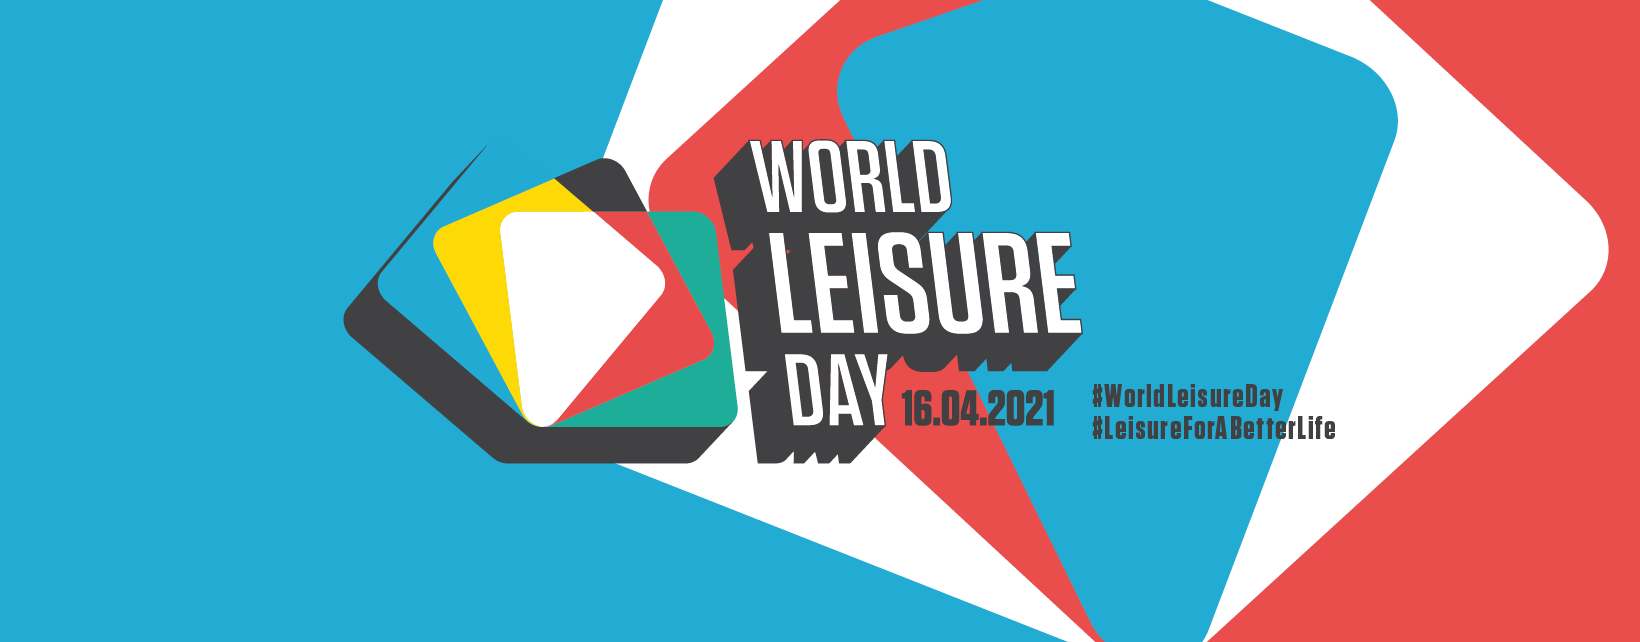 World Leisure Day will be celebrated on April 16th